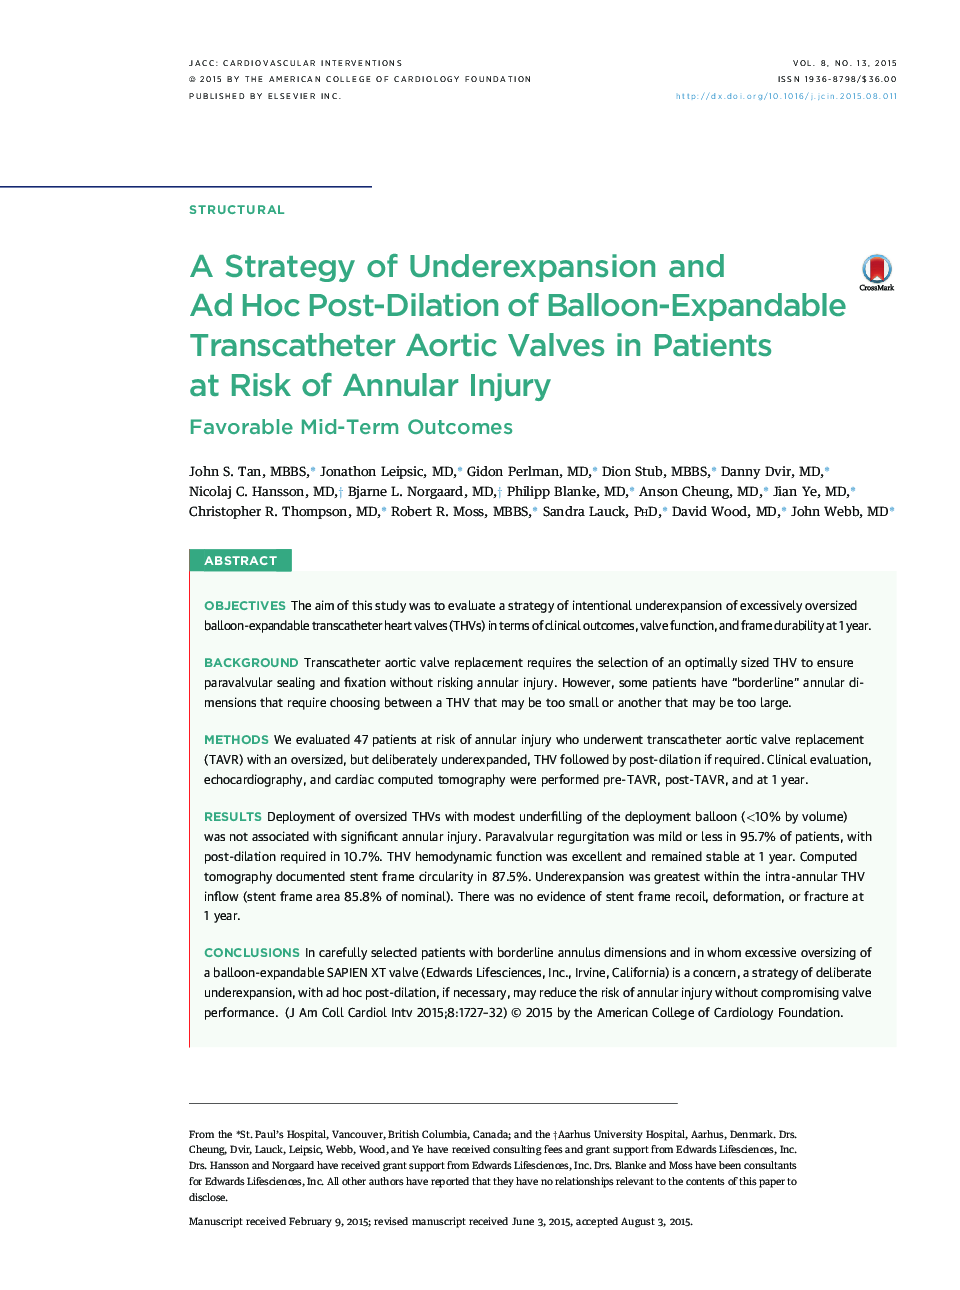 A Strategy of Underexpansion and Ad Hoc Post-Dilation of Balloon-Expandable Transcatheter Aortic Valves in Patients at Risk of Annular Injury : Favorable Mid-Term Outcomes